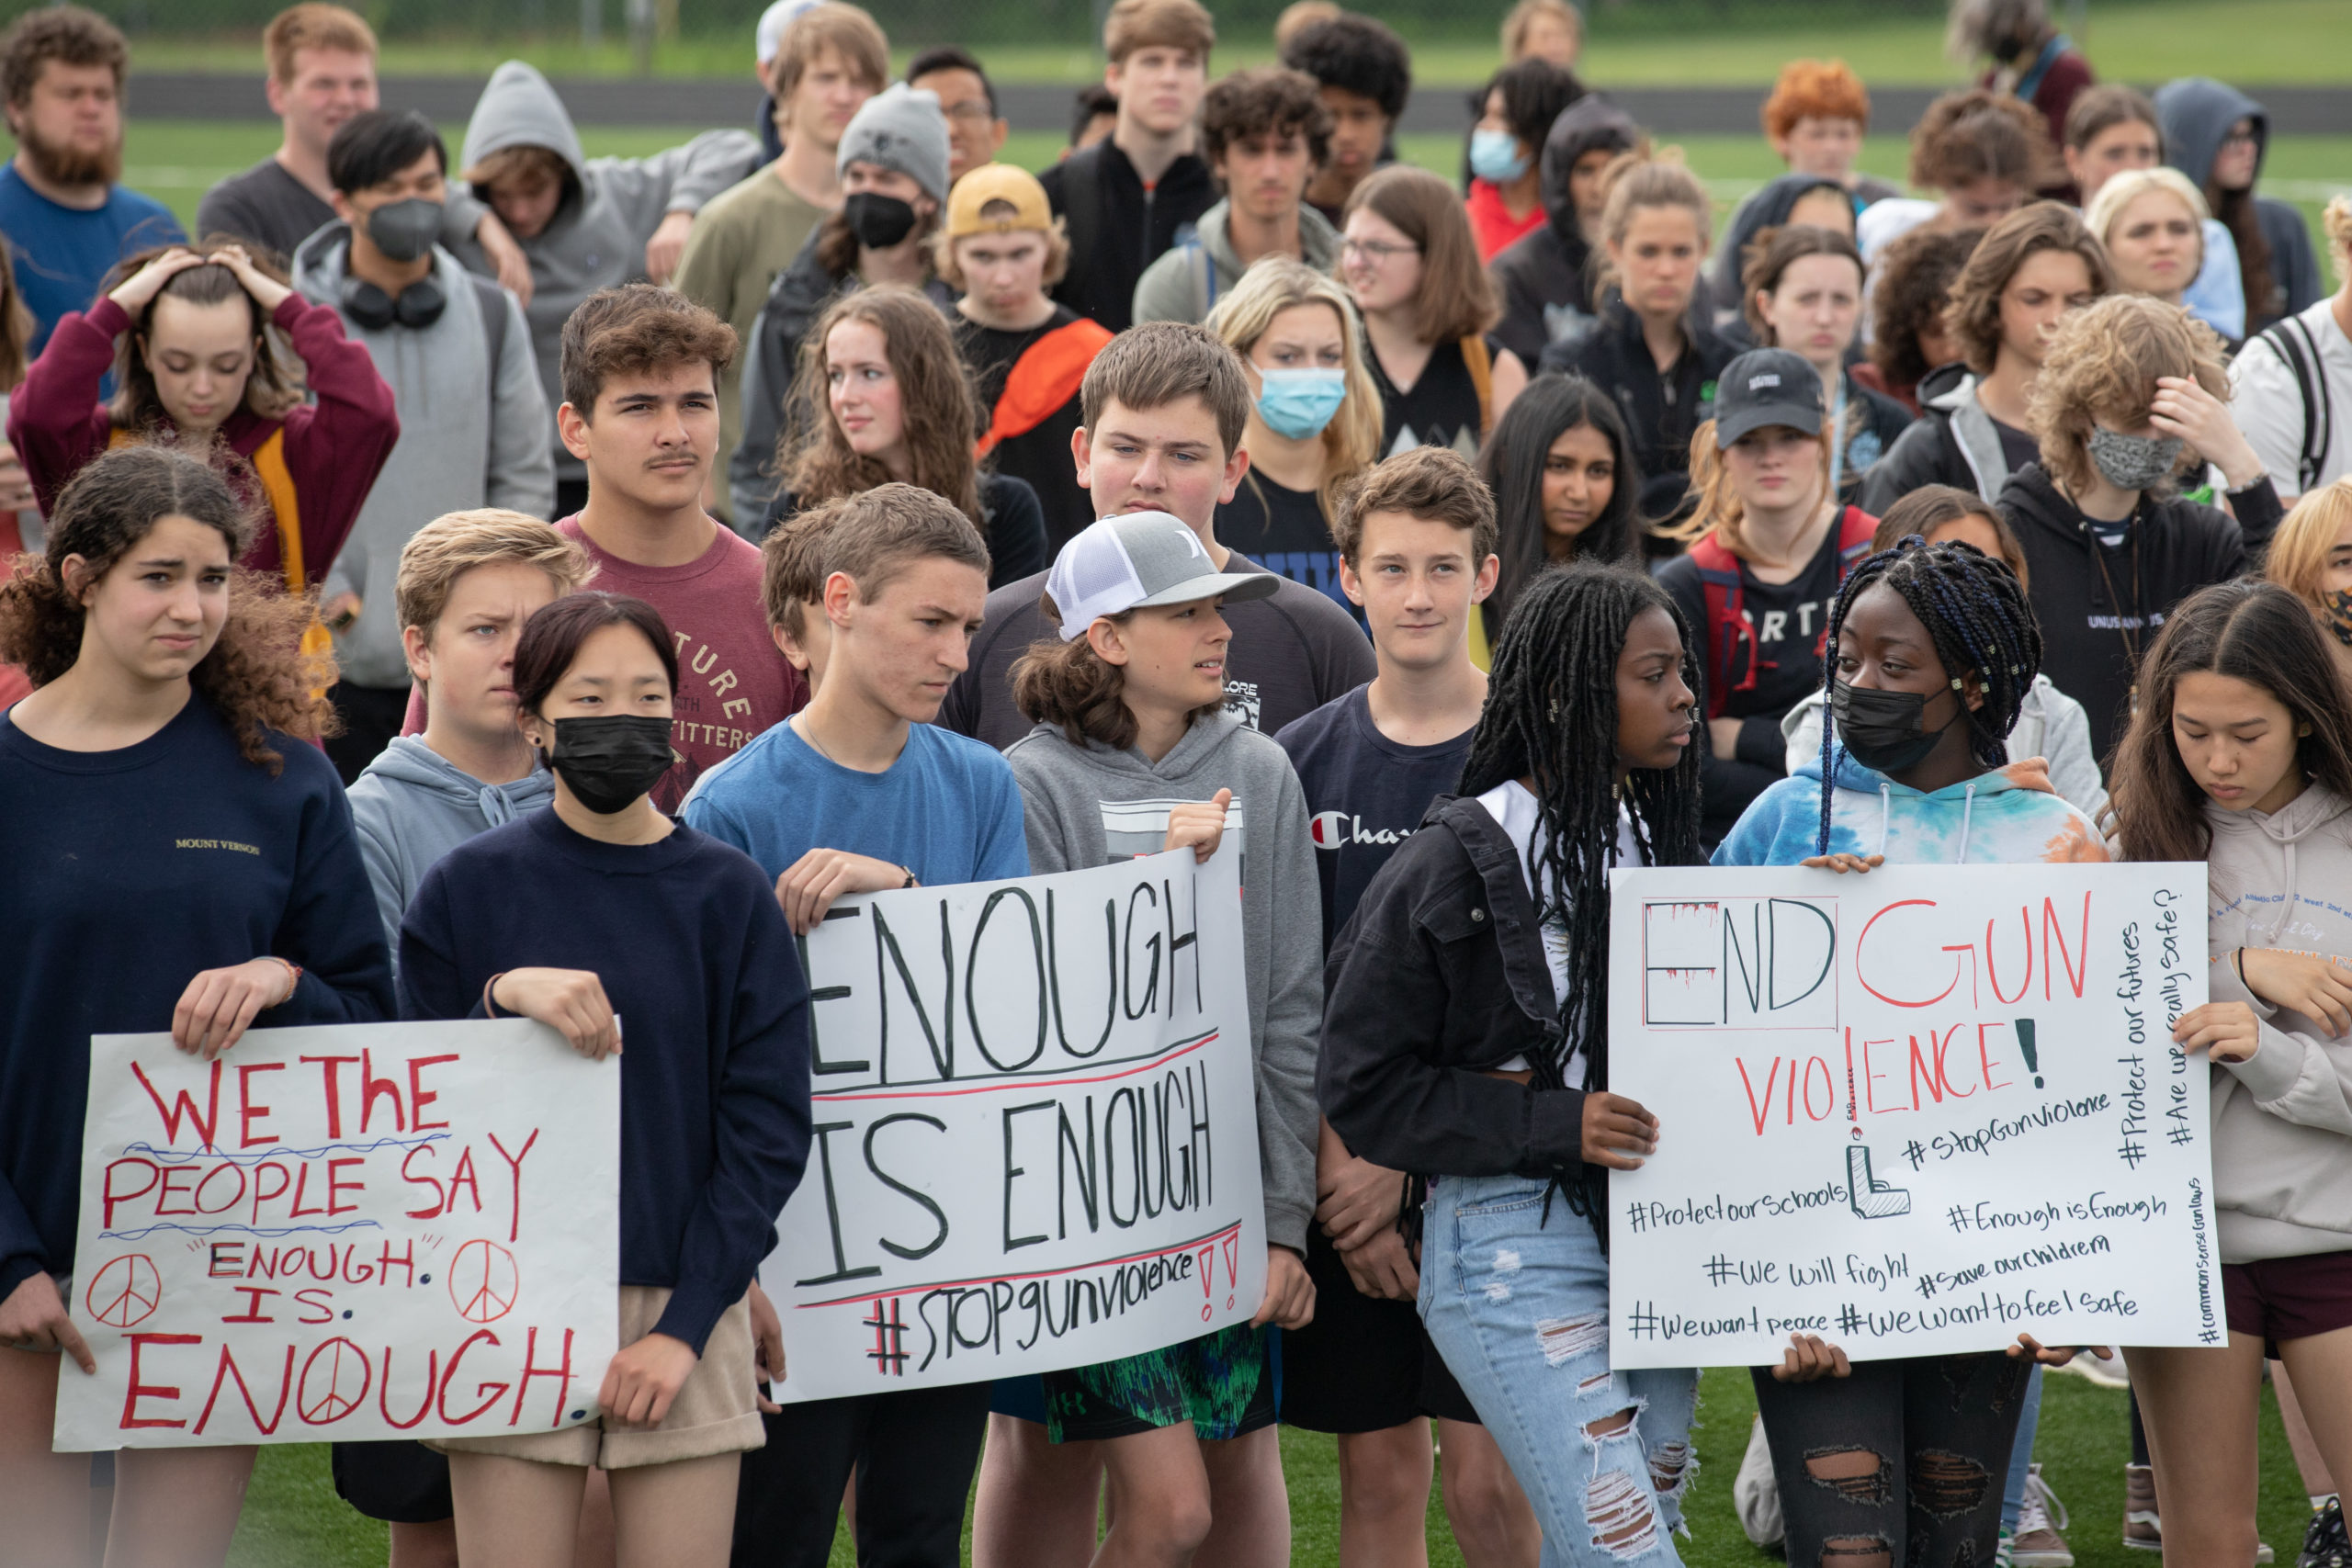 Thousands of students, from over 200 schools across 34 states, held protests all over the United States to demand action against gun violence following the Texas school shooting.